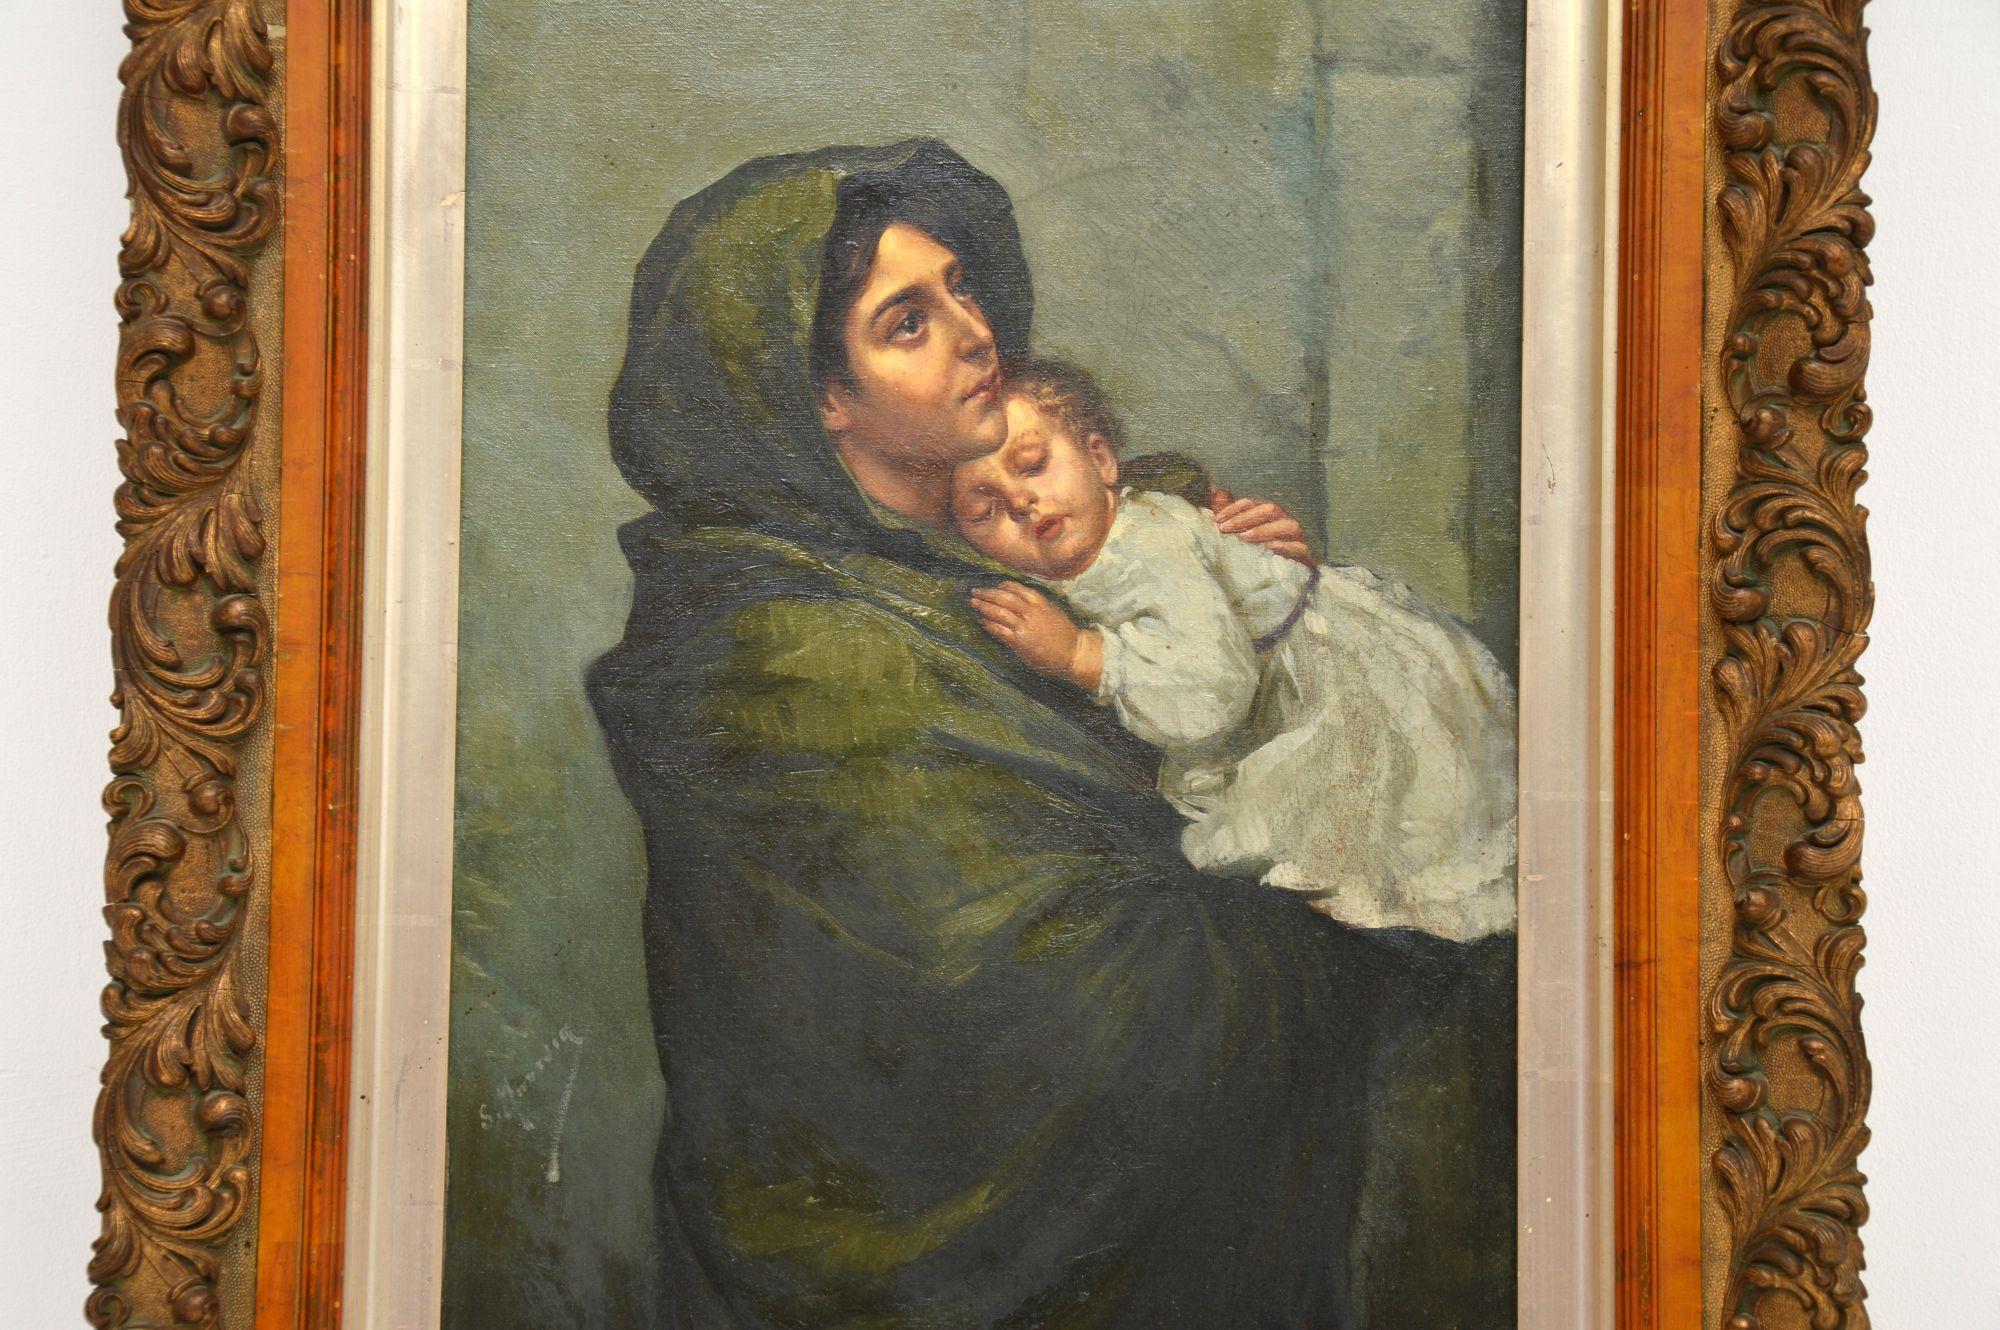 A beautifully executed antique Dutch oil painting in a gilt wood frame, depicting a mother and baby, dating from around the 1860-1880 period.

It is a beautiful and touching subject, executed with great skill and it is signed by the artist, though